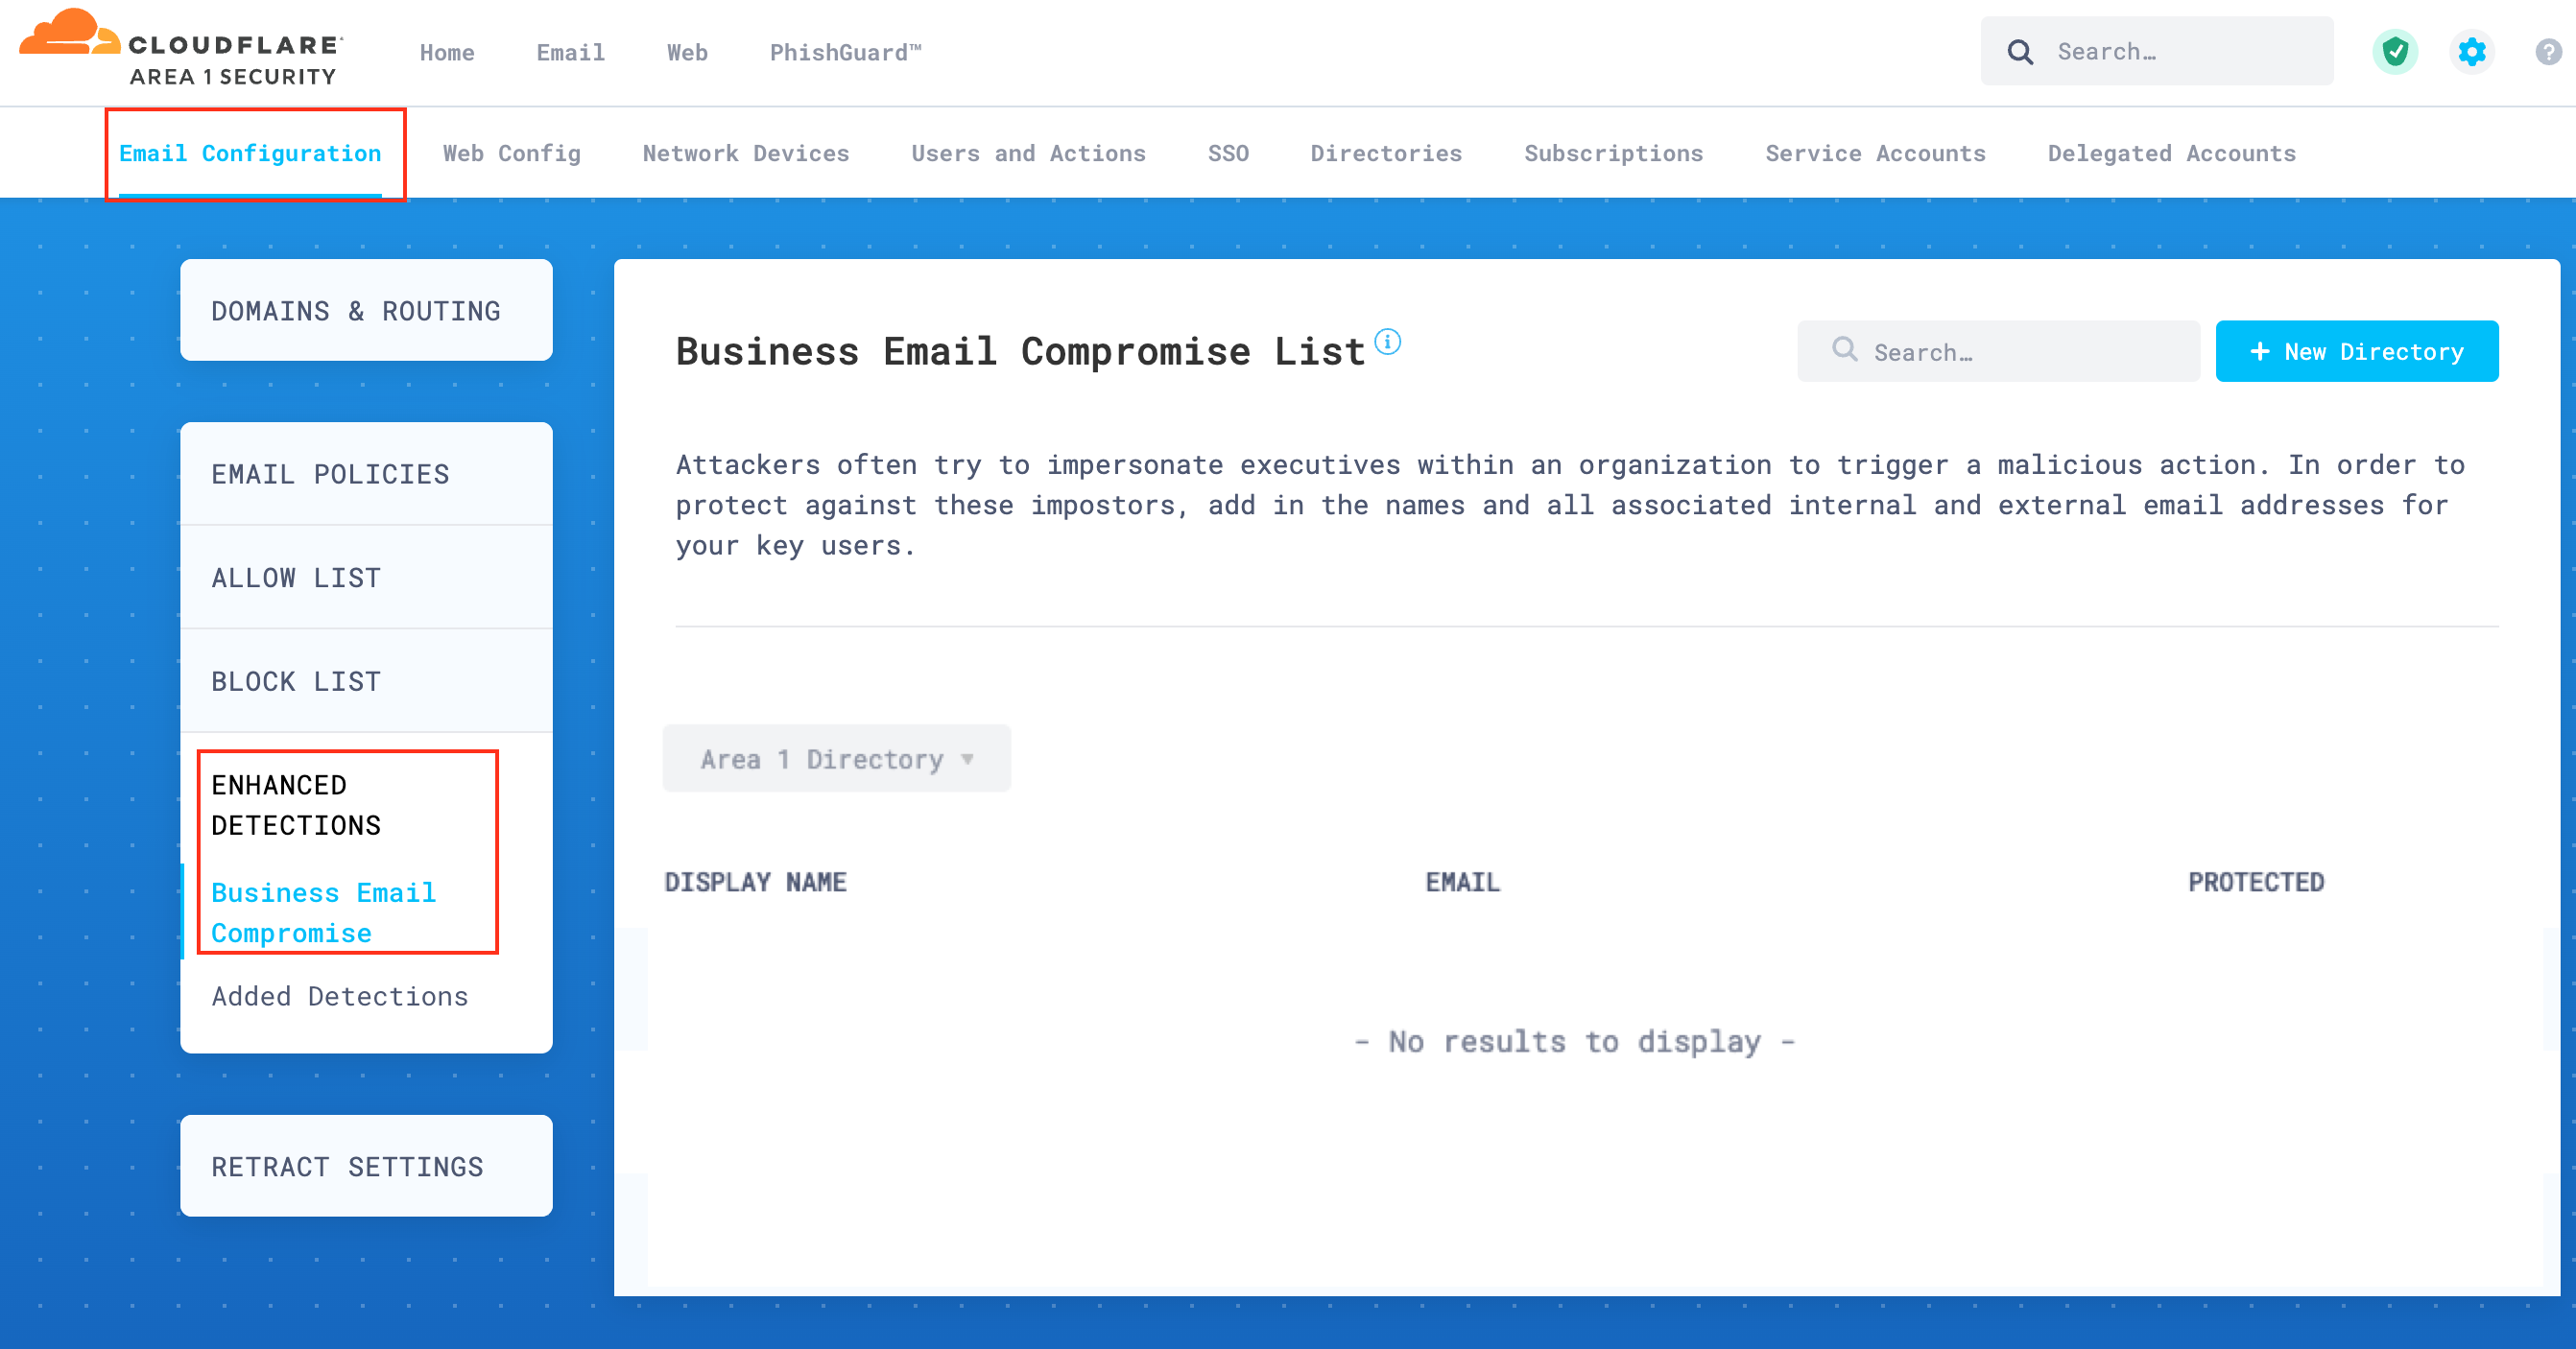 Access Business Email Compromise in Area 1 dashboard to start setting up this feature